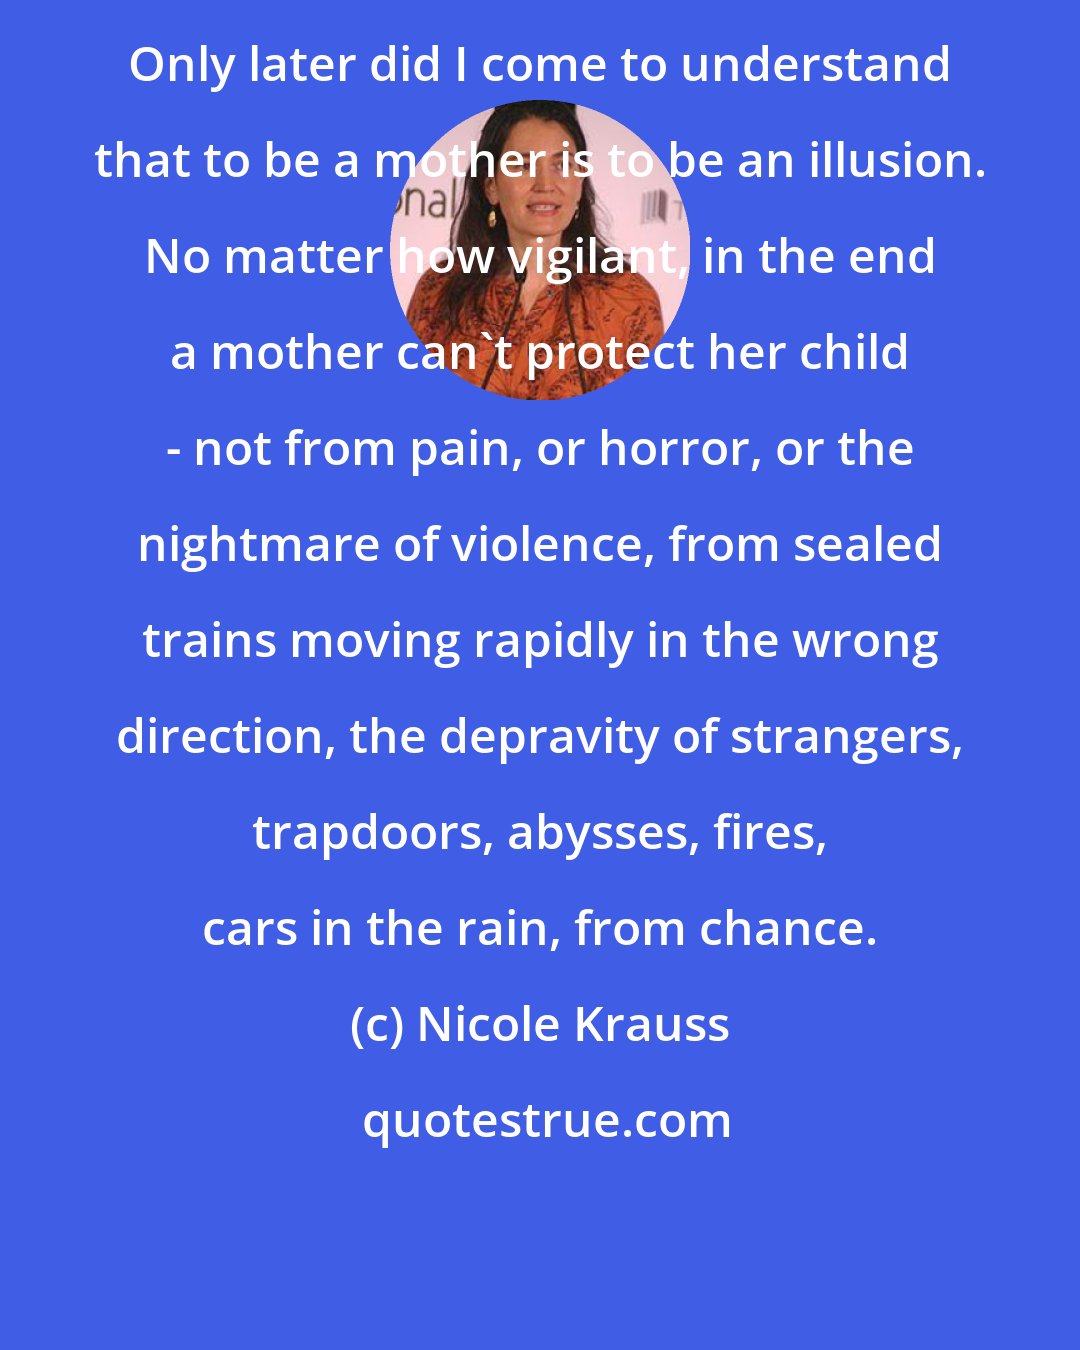 Nicole Krauss: Only later did I come to understand that to be a mother is to be an illusion. No matter how vigilant, in the end a mother can't protect her child - not from pain, or horror, or the nightmare of violence, from sealed trains moving rapidly in the wrong direction, the depravity of strangers, trapdoors, abysses, fires, cars in the rain, from chance.